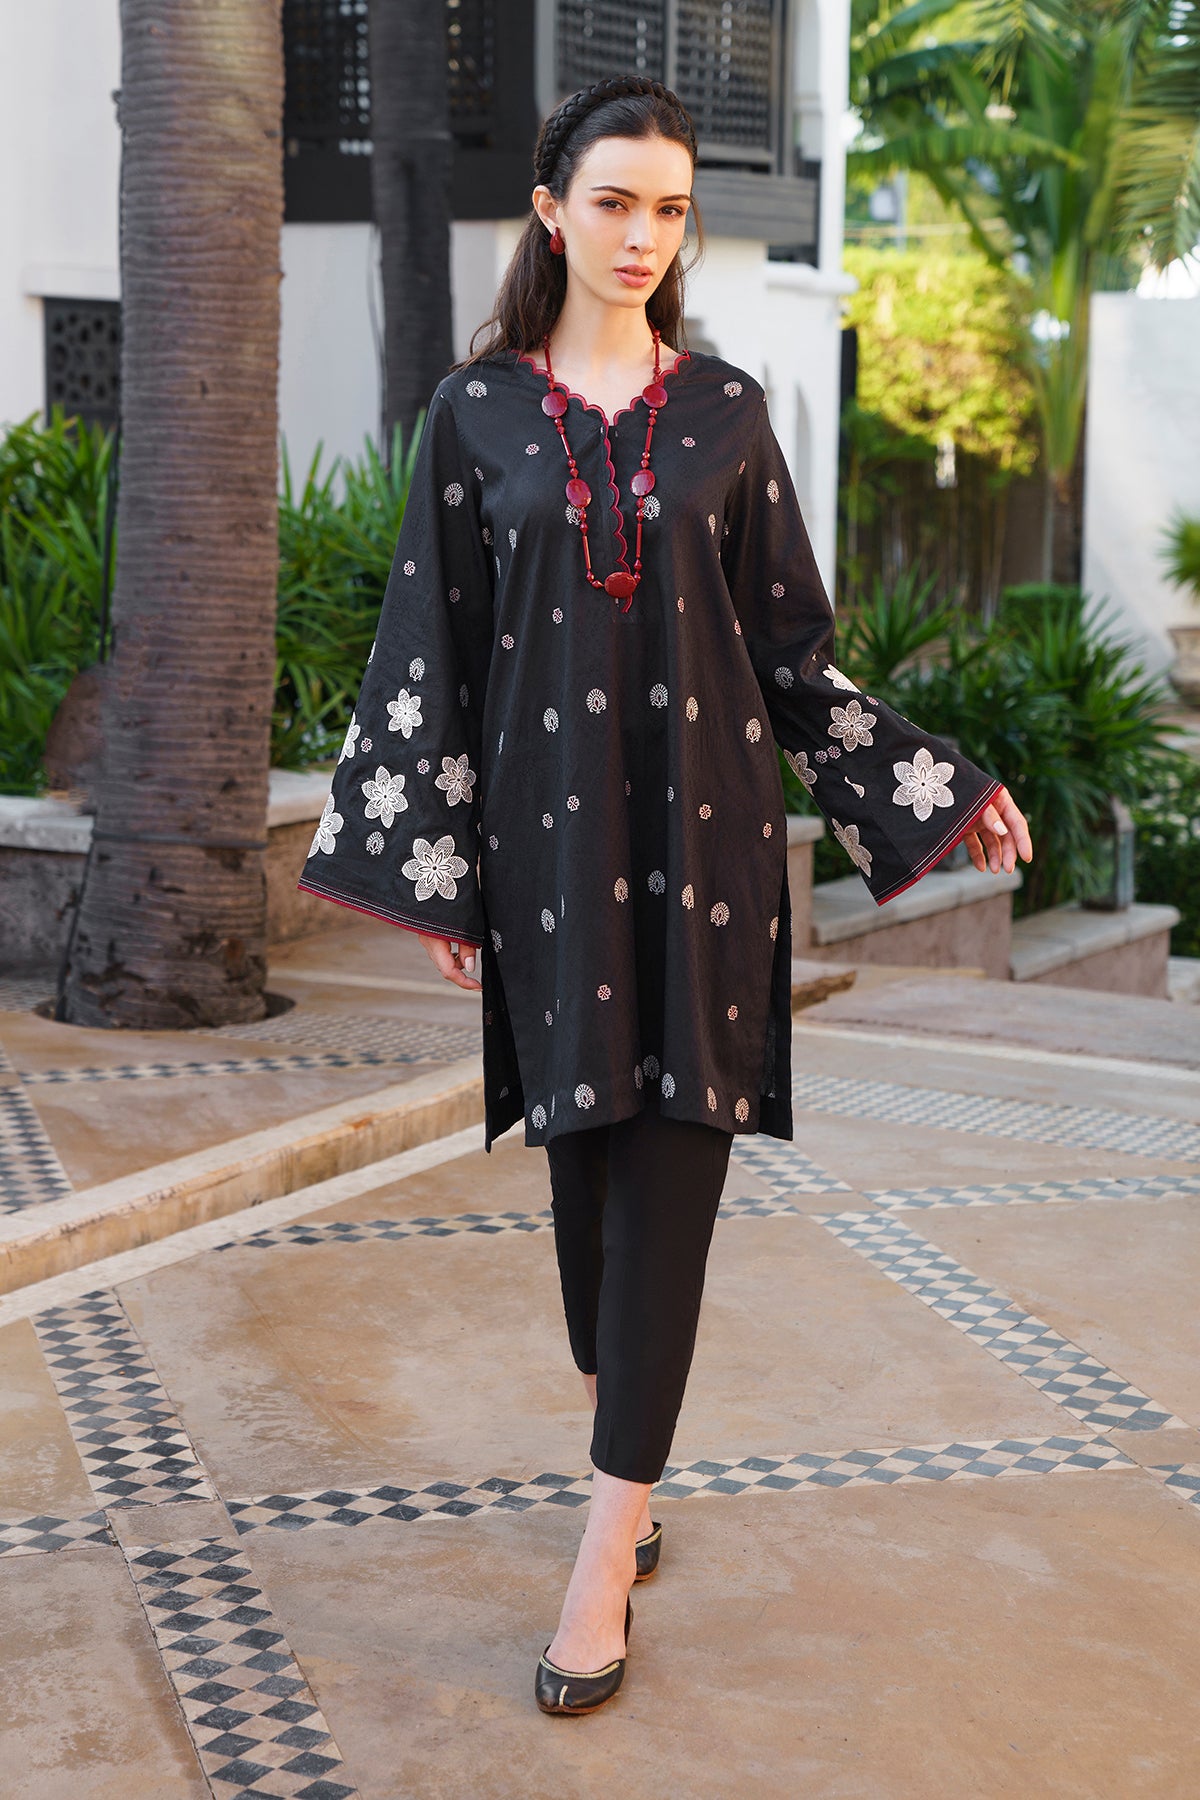 Buy WEST LINE WOMEN black floral print chiffon top Online in Pakistan On   at Lowest Prices | Cash On Delivery All Over the Pakistan